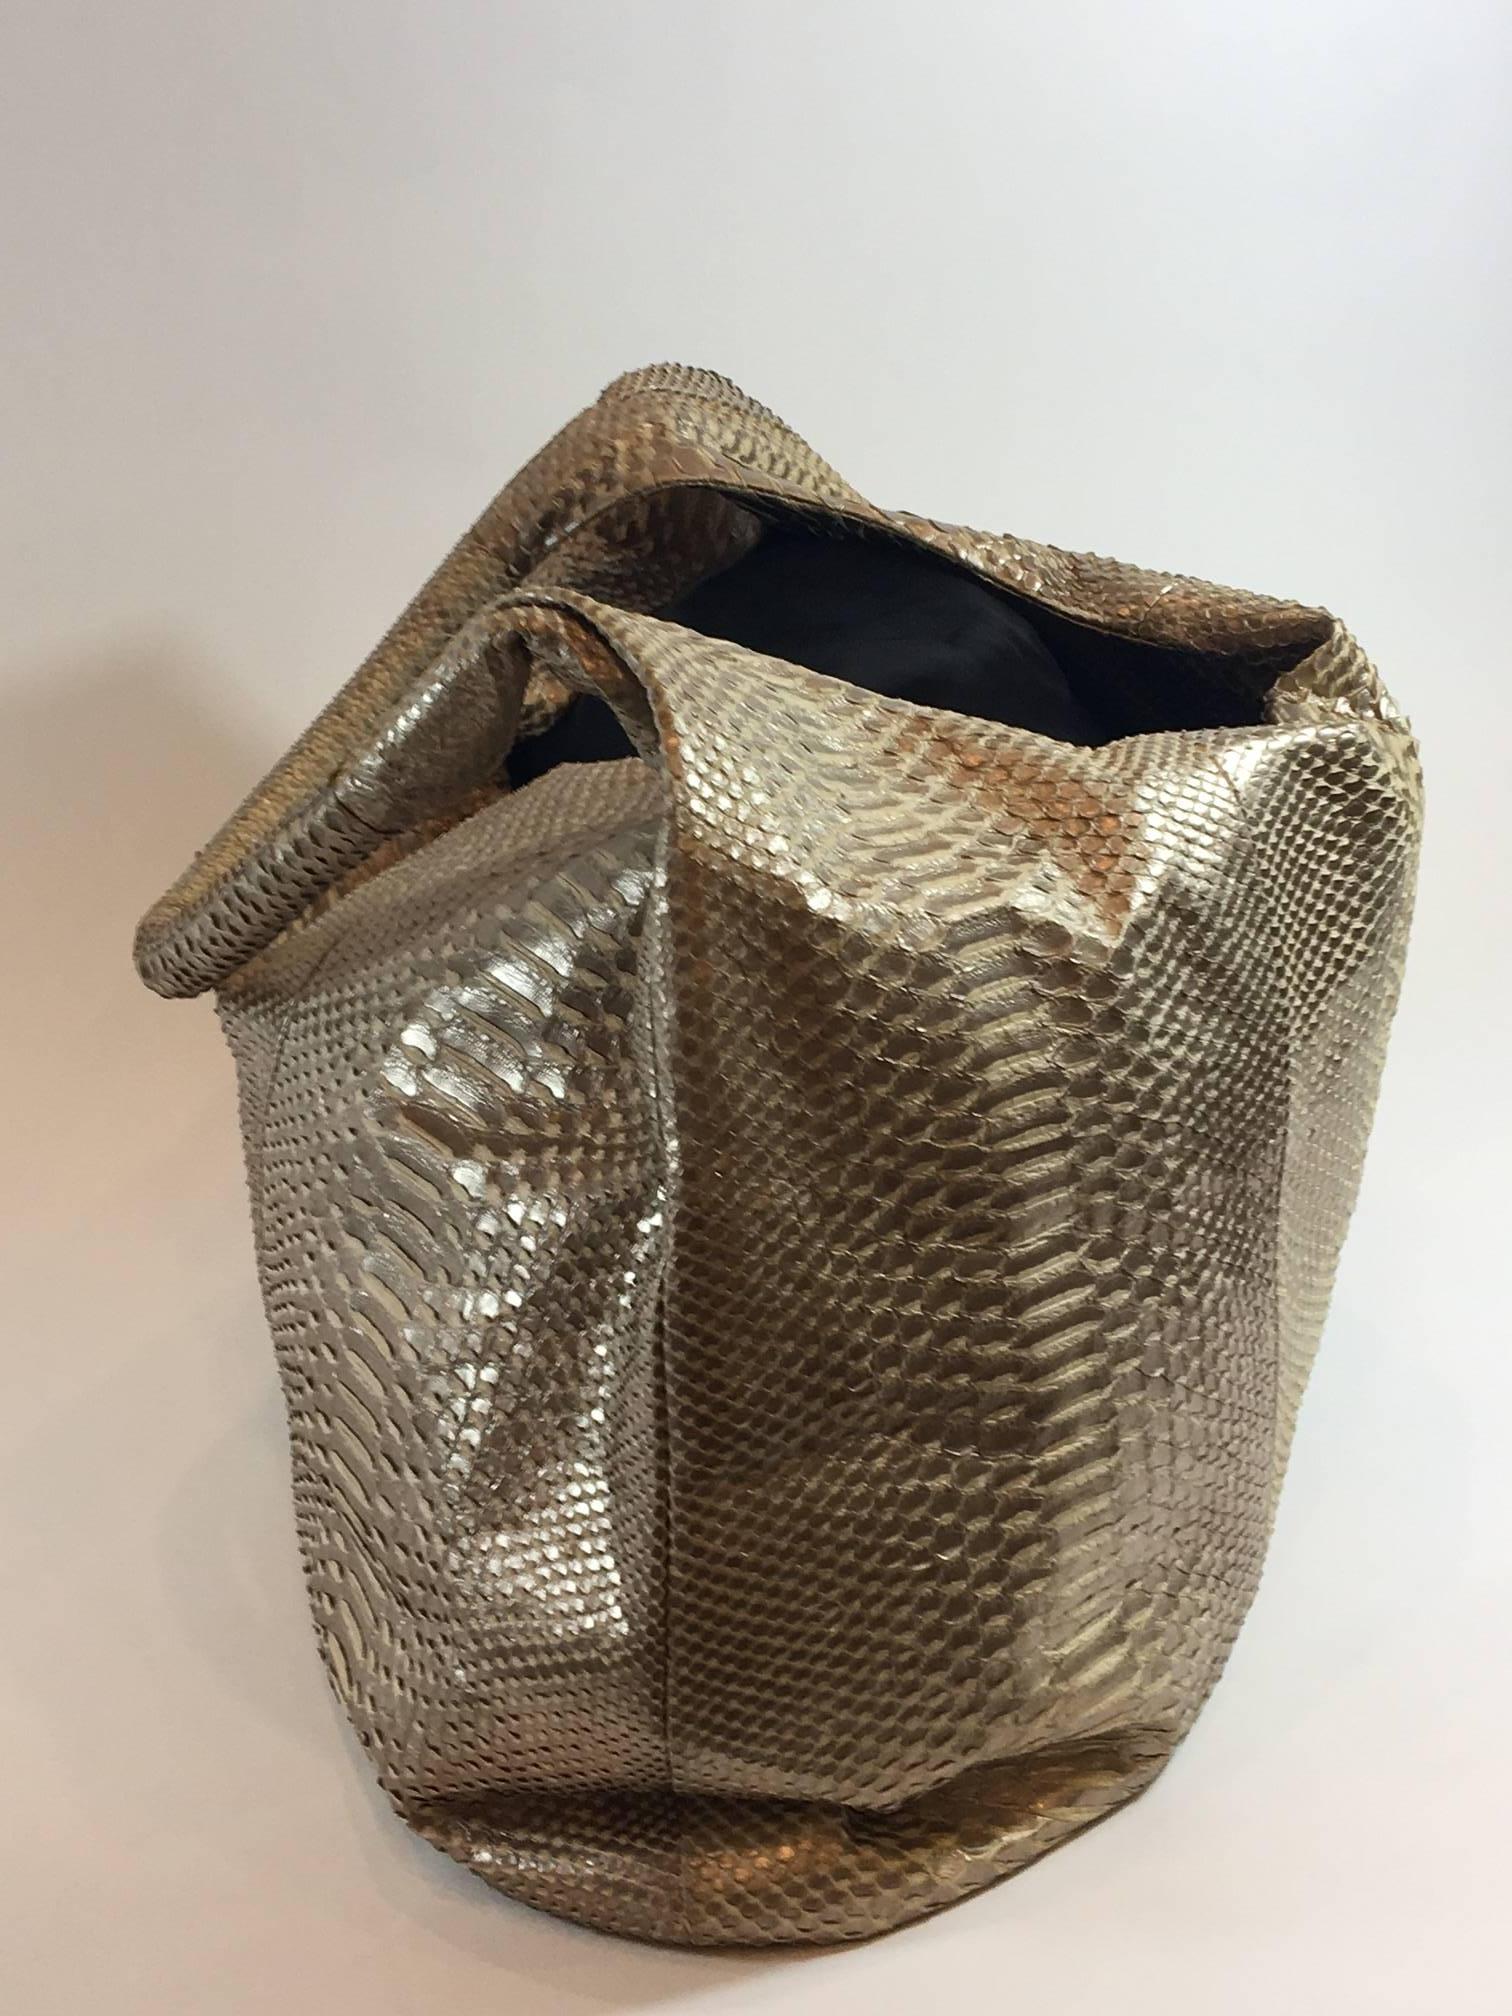 Devi Kroell, known for her beautiful work with exotic skins, has built a reputation as one of the leading luxury designers in the fashion industry.
This Gold metallic python Devi Kroell hobo will fit all your daily needs... and then some. Gold-tone